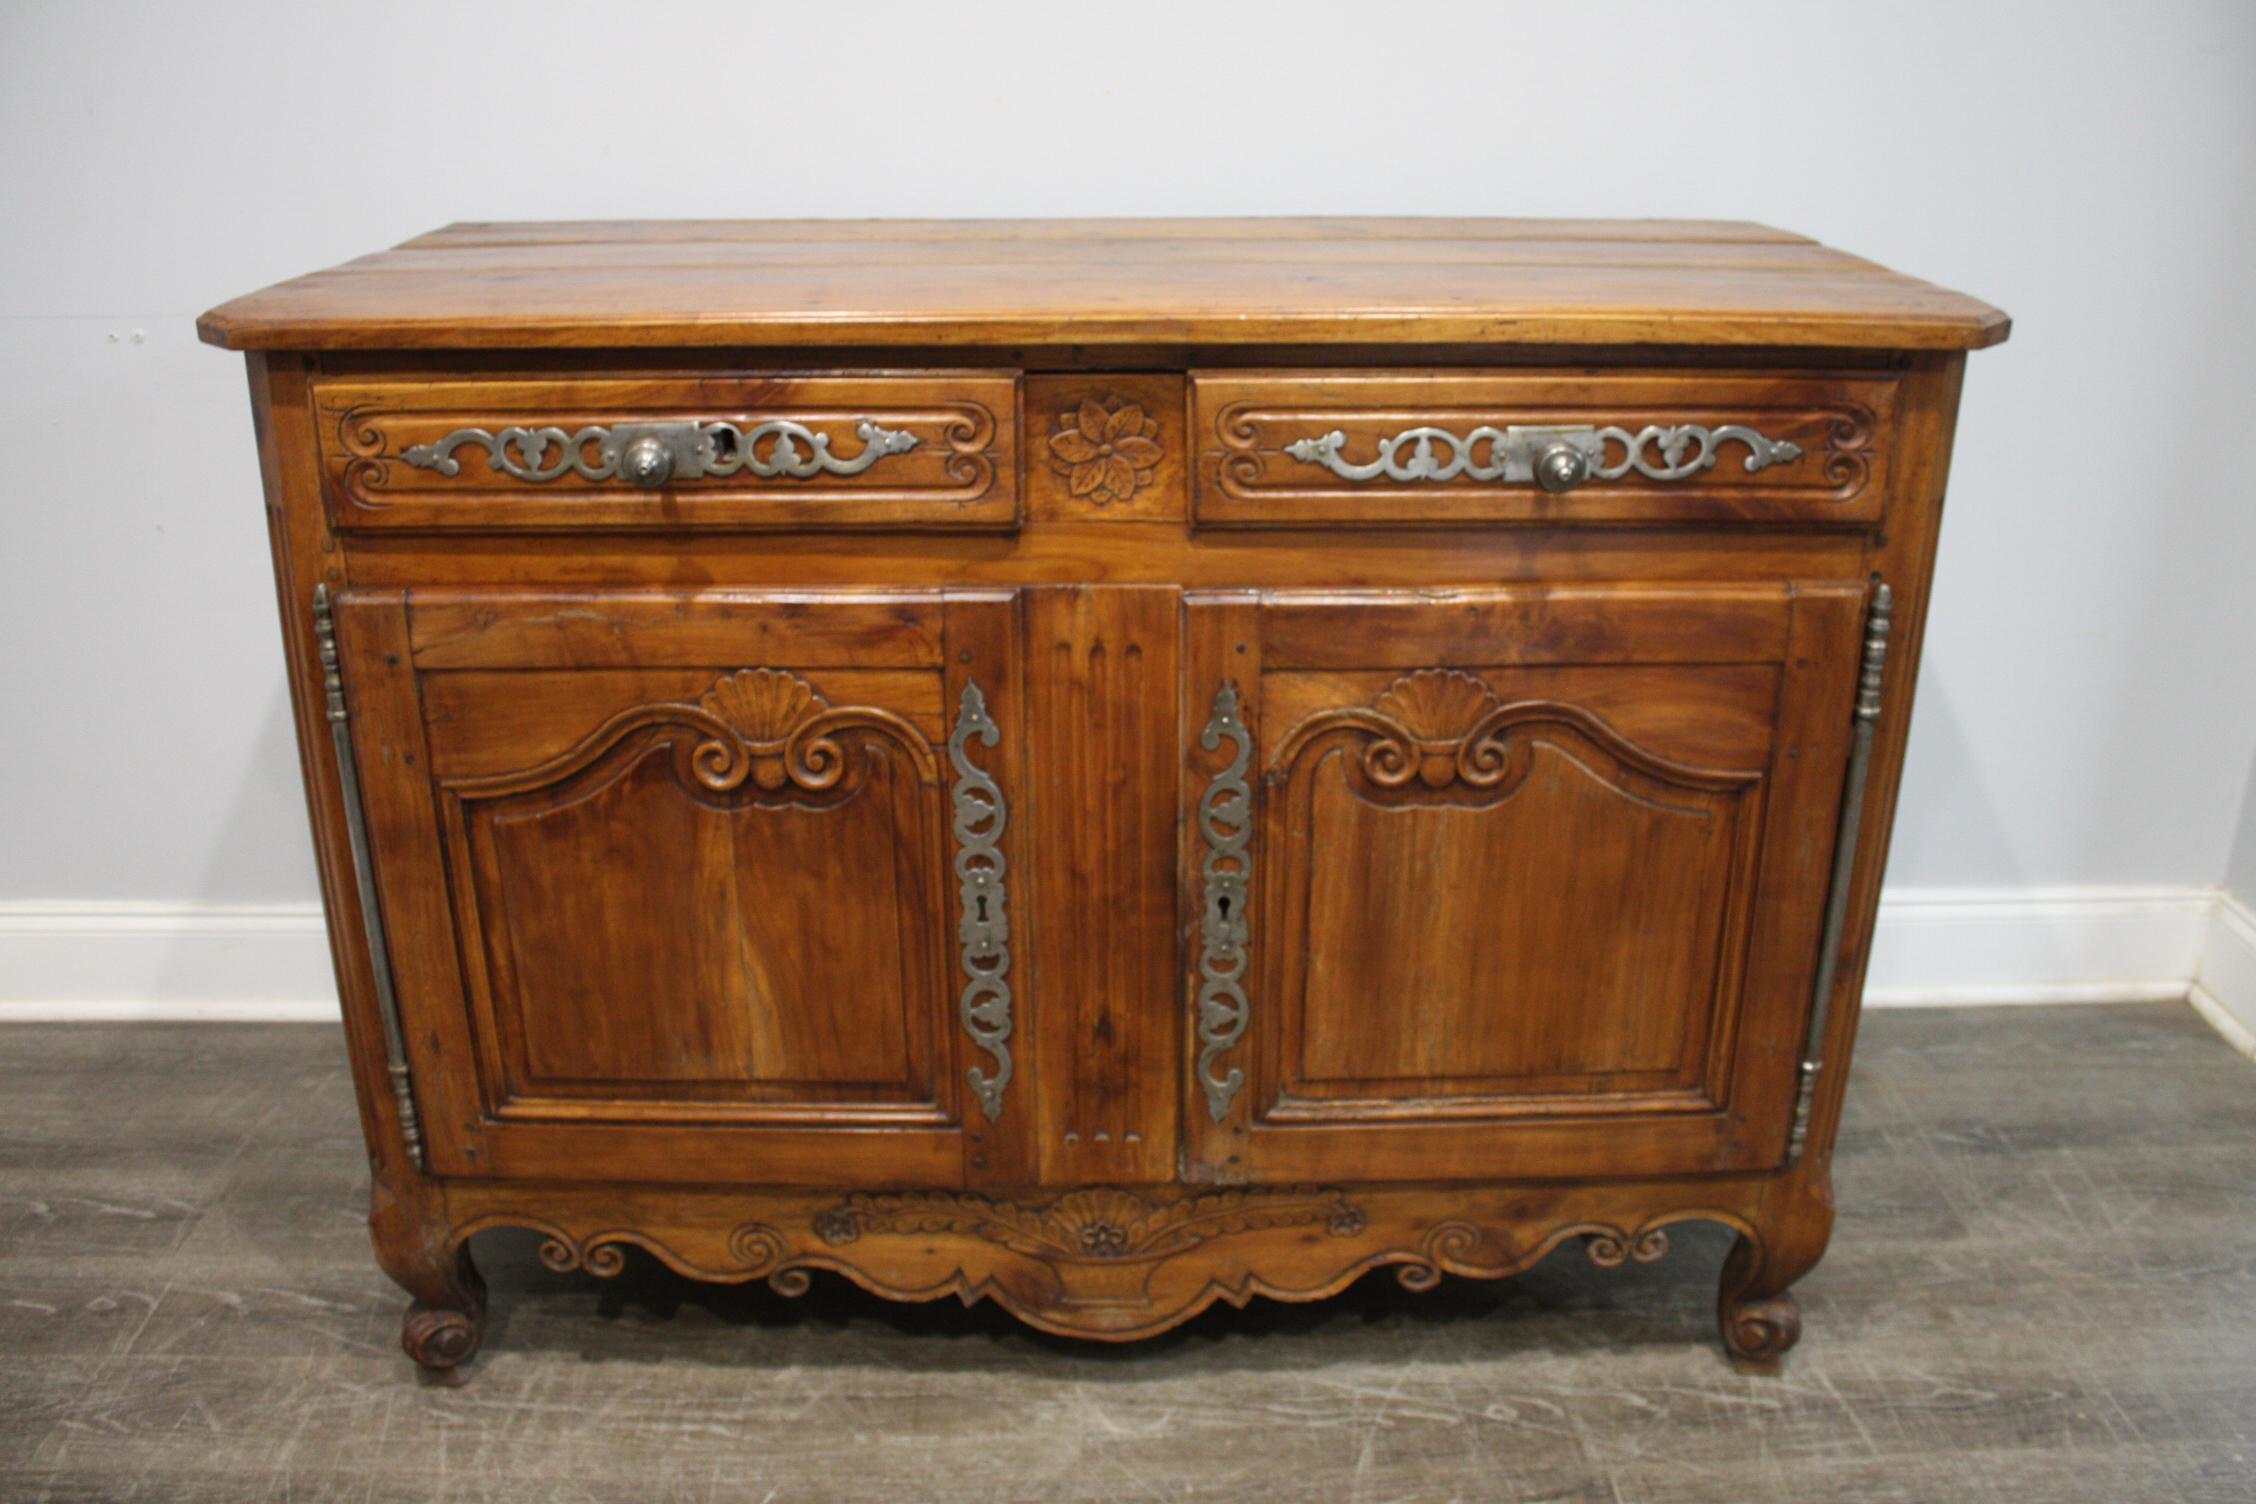 This buffet is made of walnut with a beautiful warmth patine. The hardware are thick and strong, 